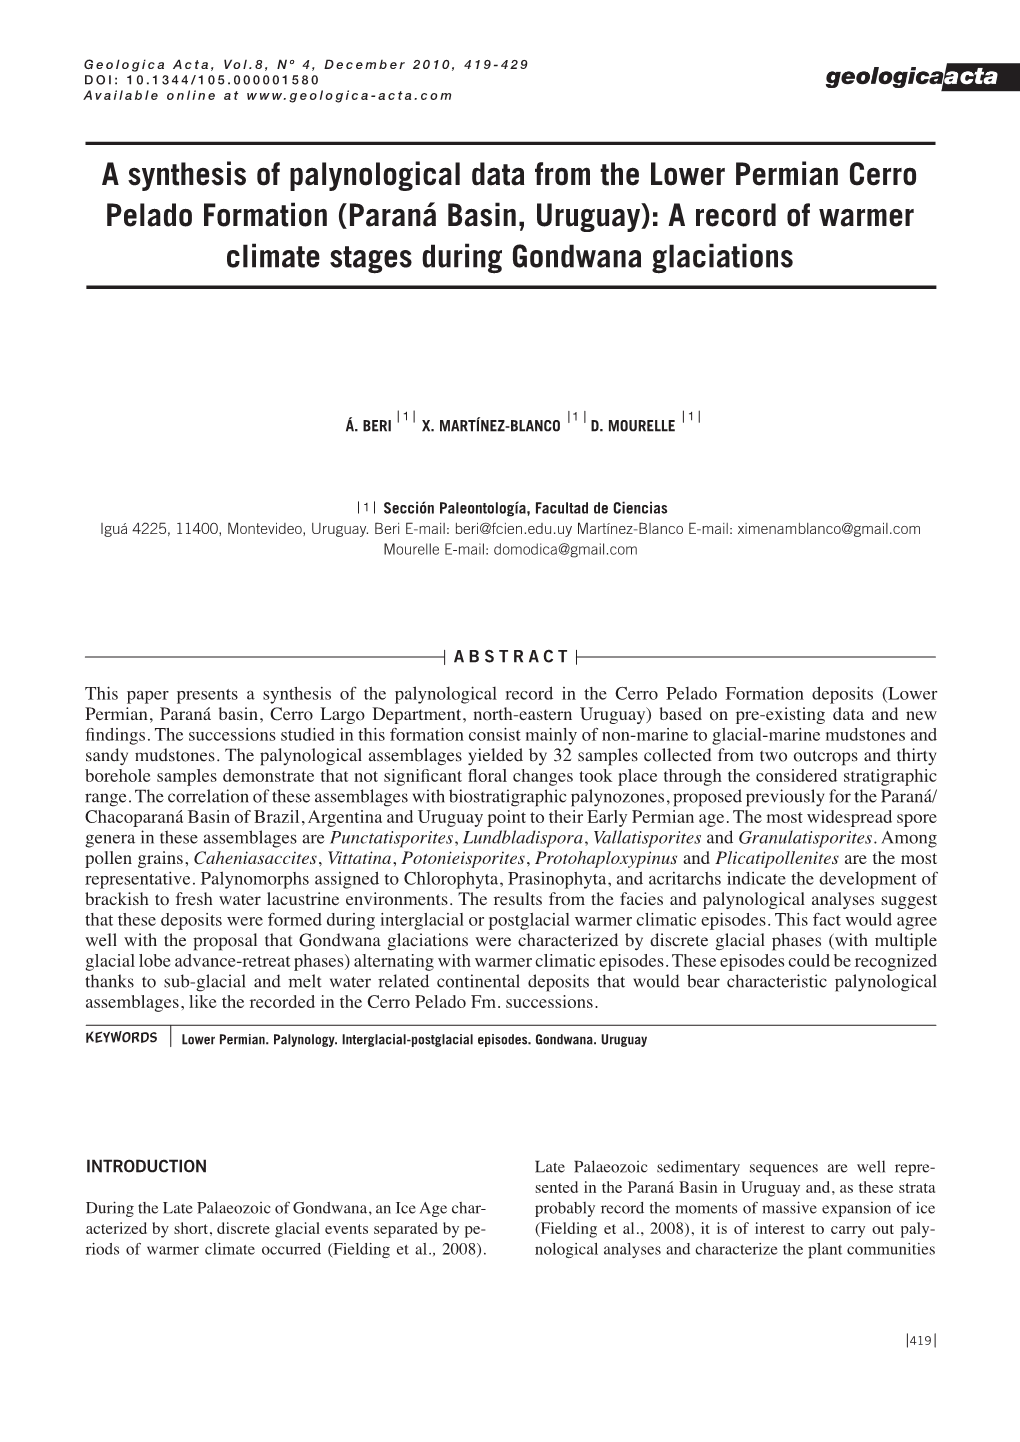 A Synthesis of Palynological Data from the Lower Permian Cerro Pelado Formation (Paraná Basin, Uruguay): a Record of Warmer Climate Stages During Gondwana Glaciations